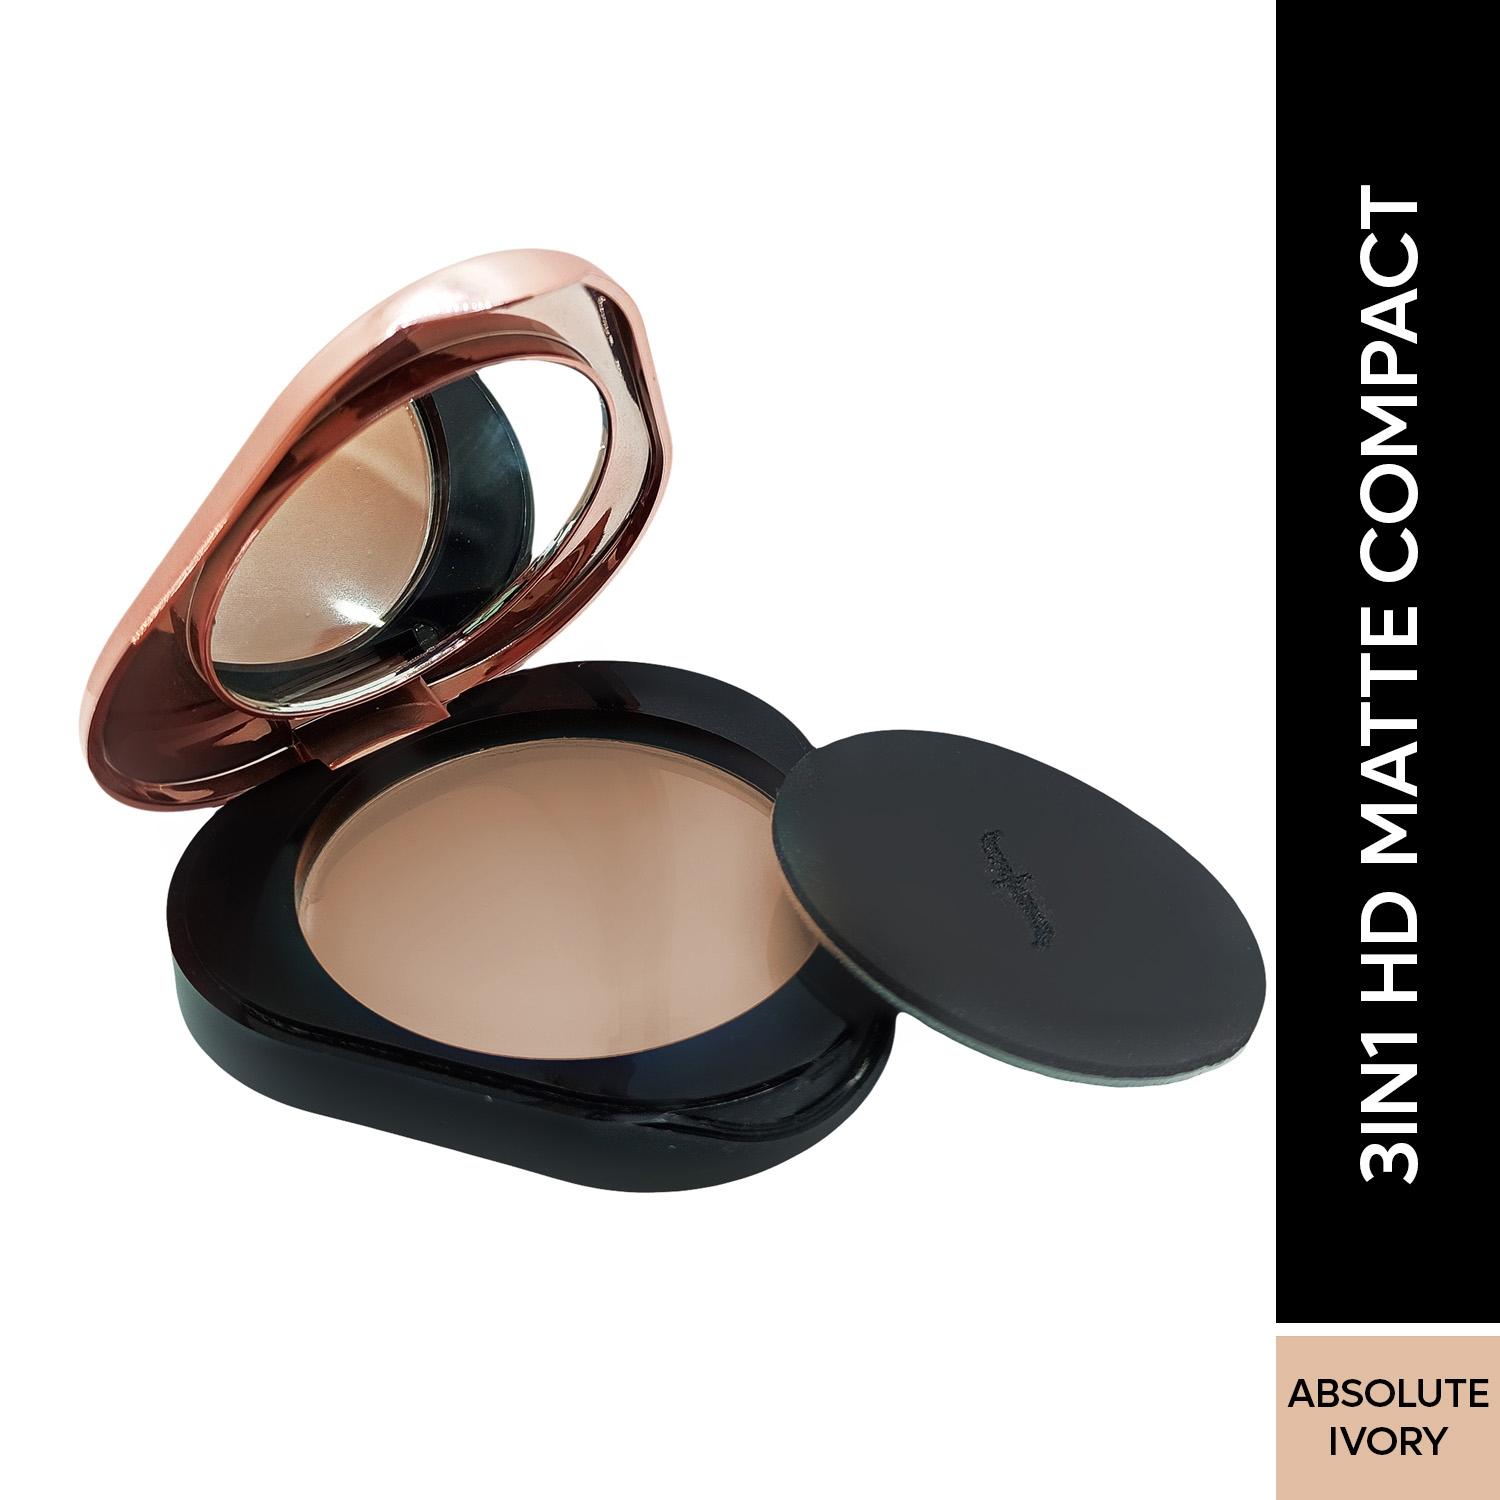 faces canada 3 in 1 hd matte compact + foundation + hydration - absolute ivory 01 (8g)